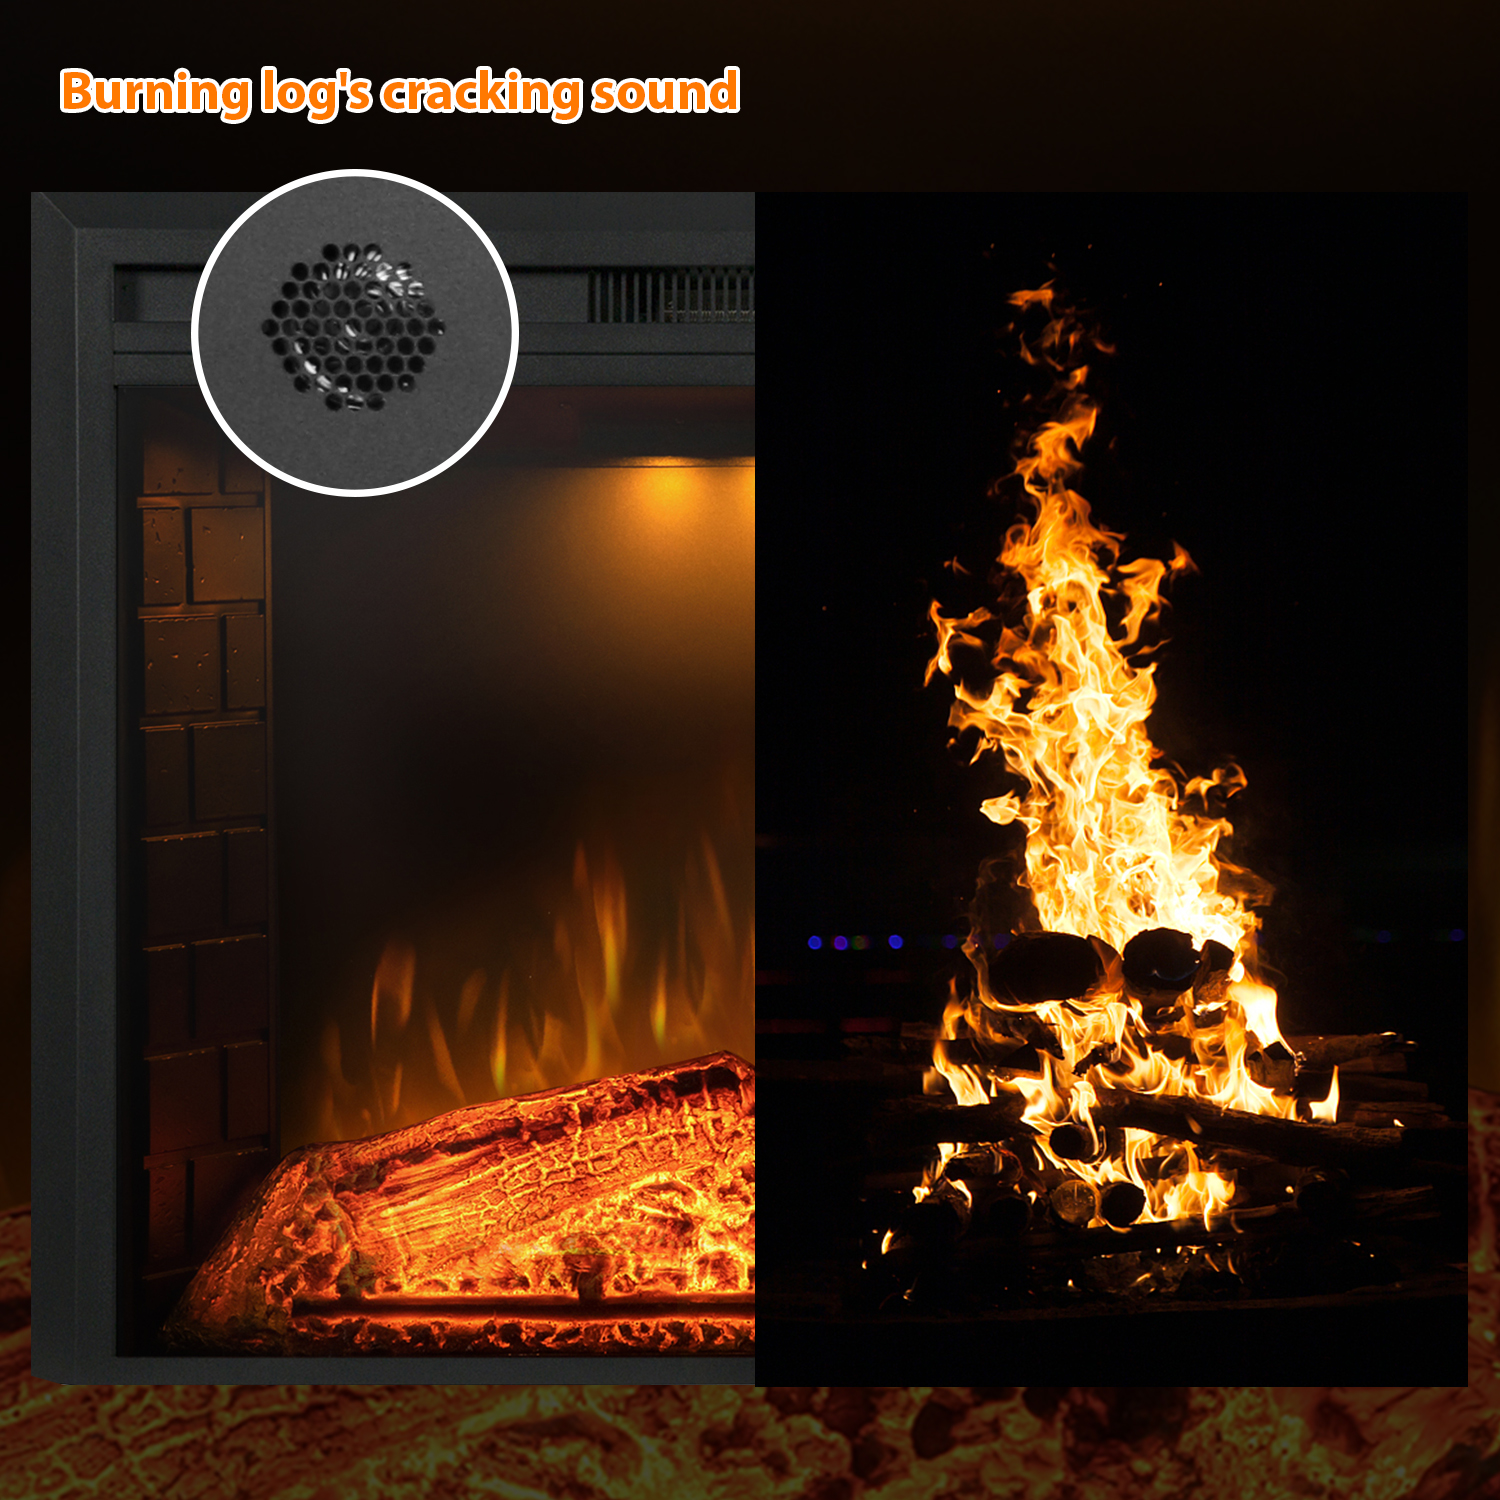 Valuxhome Electric Fireplace Inserts with Fire Crackling Sound, Adjustable Light & Flame Brightness